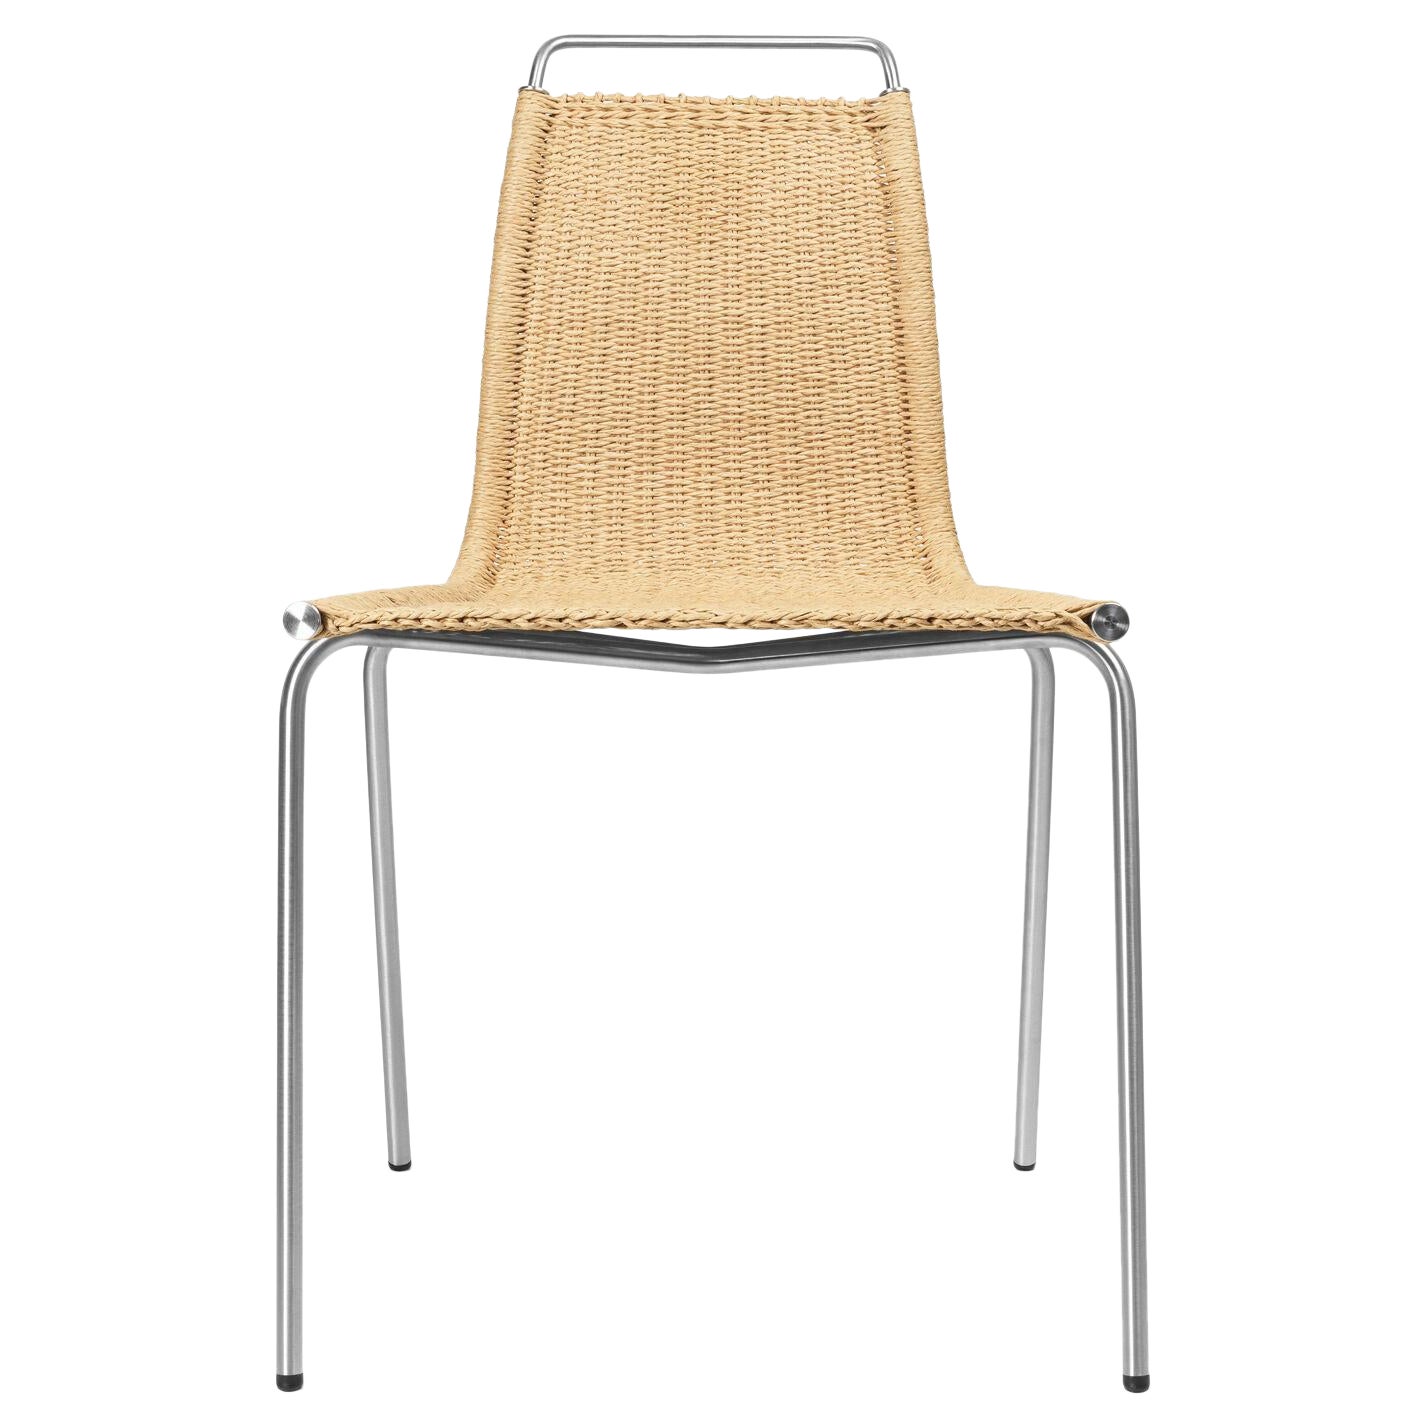 PK1 Chair with Stainless Steel Frame and Papercord Seat *Quickship*